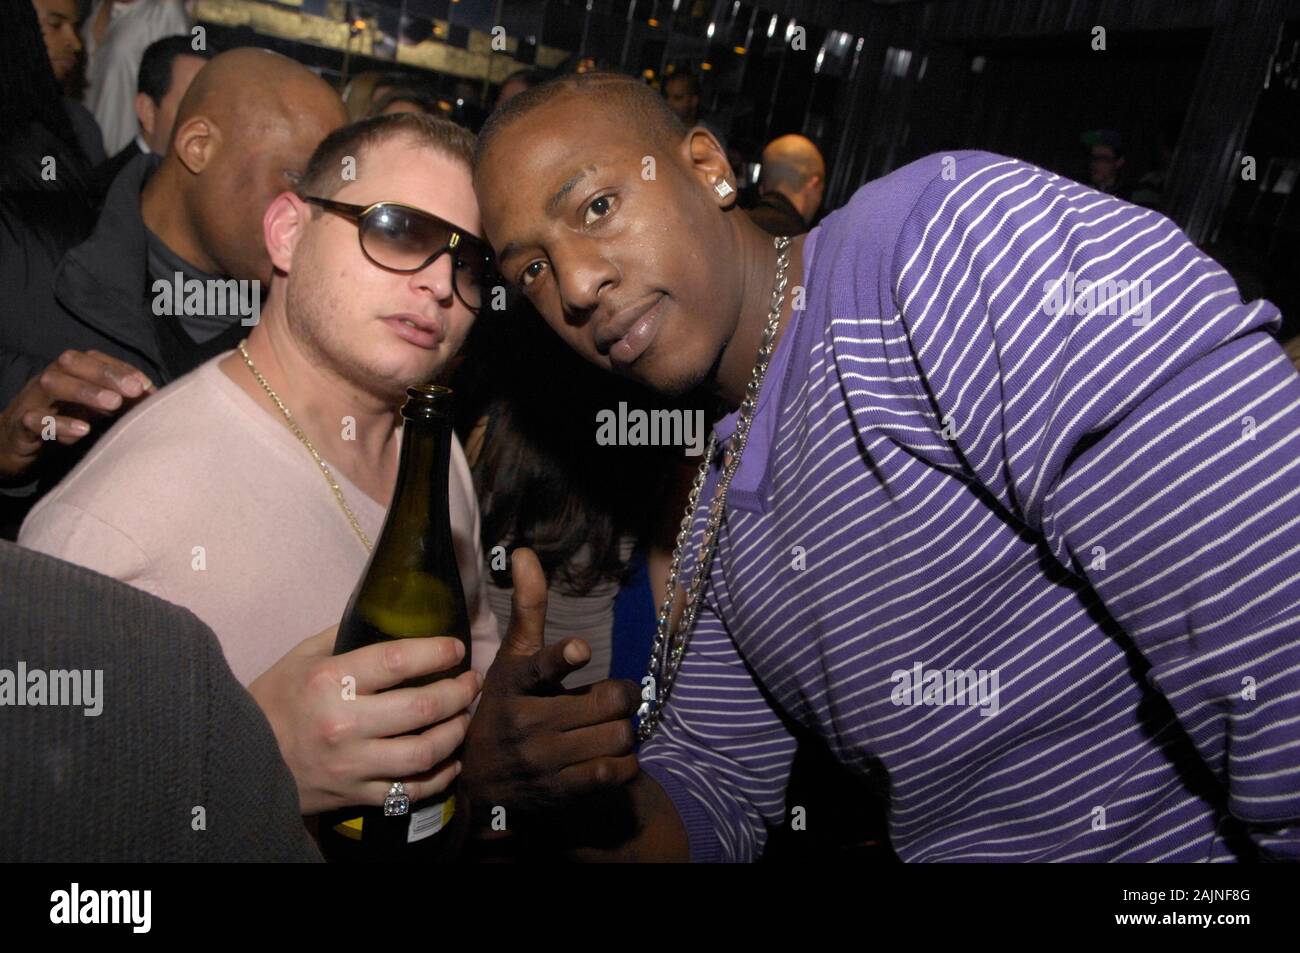 (L-R) Producer Scott Storch and rapper Shorty Mack at Wonderland on January 21, 2010 in Hollywood. Stock Photo